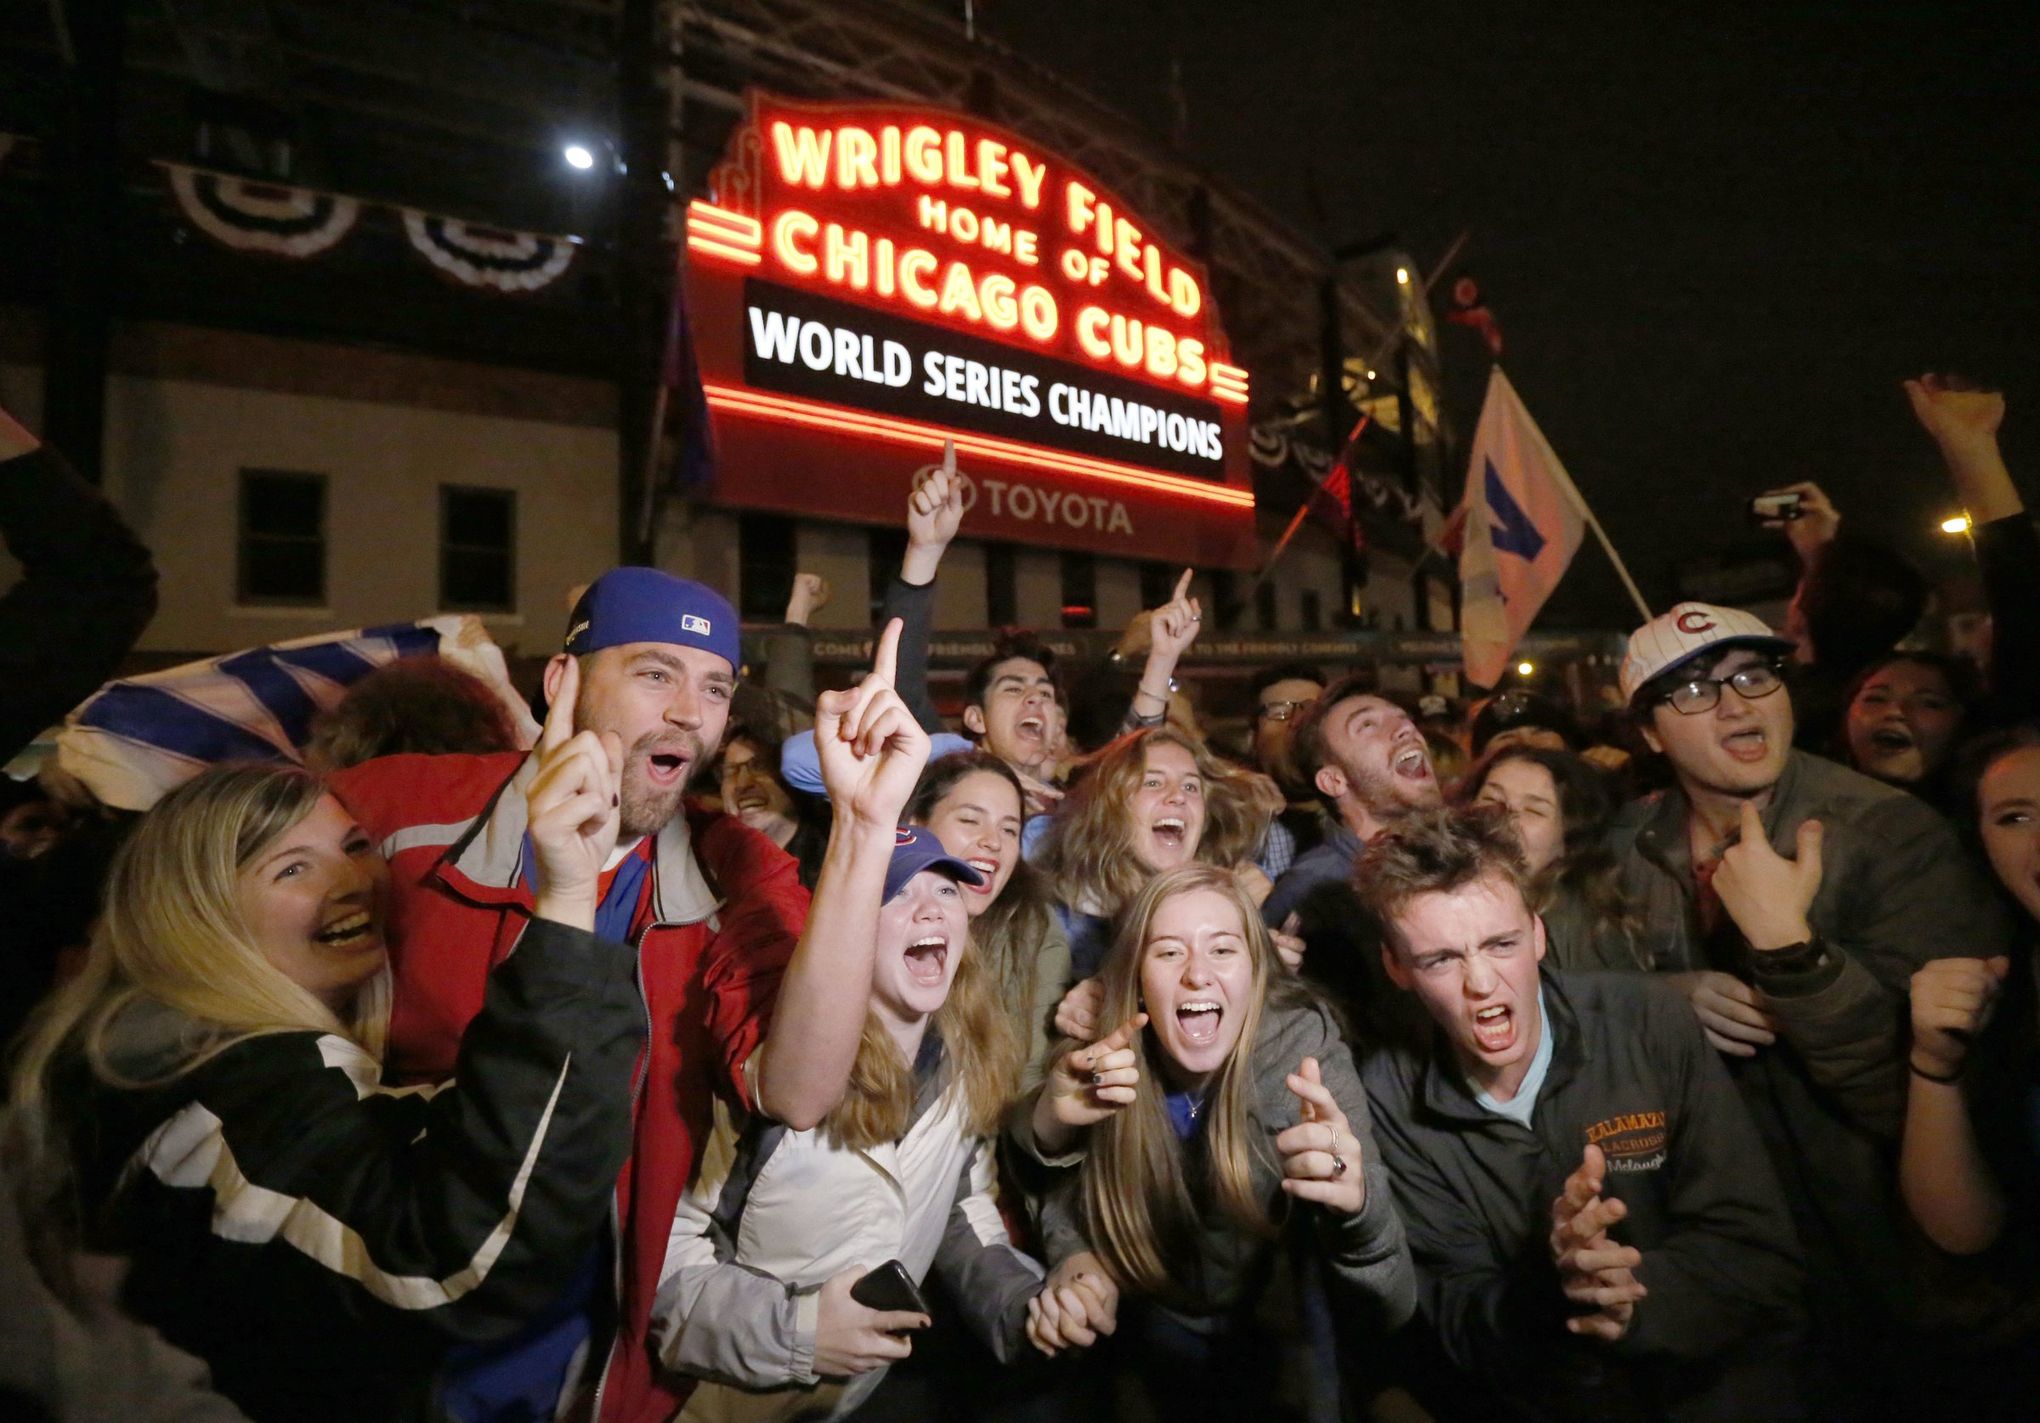 Sullivan: Another Cubs home season ends at Wrigley, where